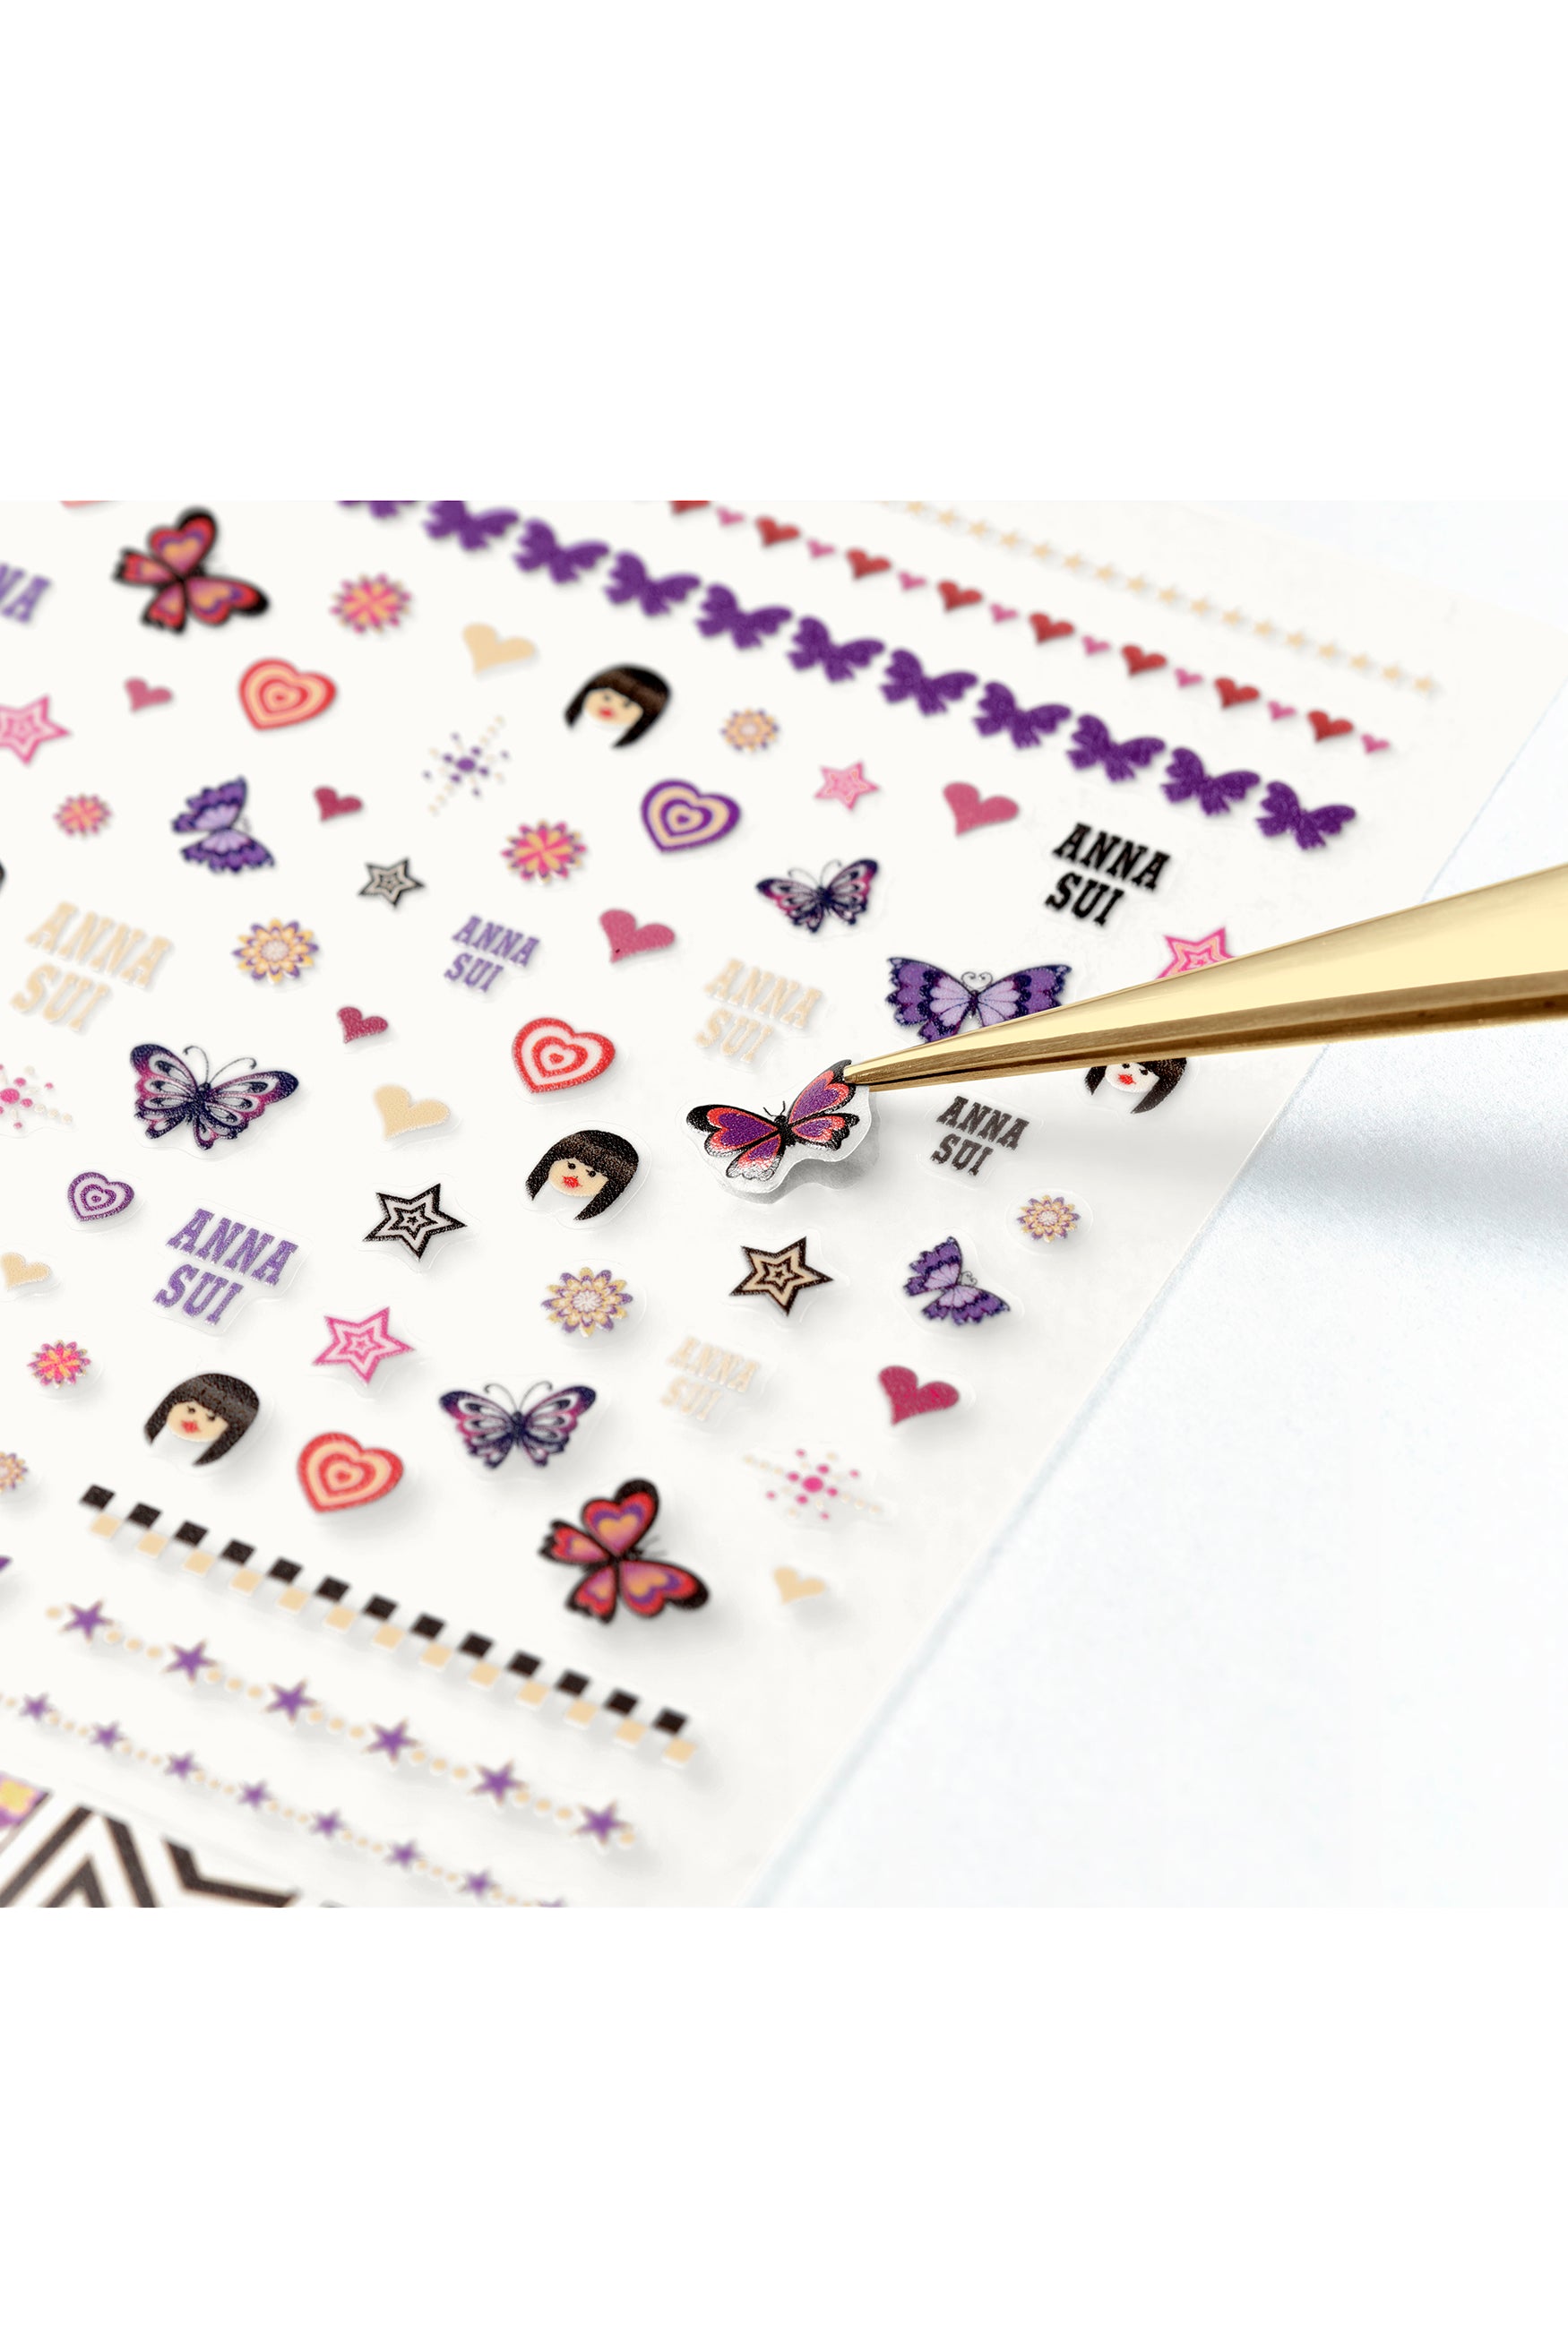 Decorate sheet of nails stickers, butterflies, hearts, stars, and iconic signature. Made with high quality adhesive